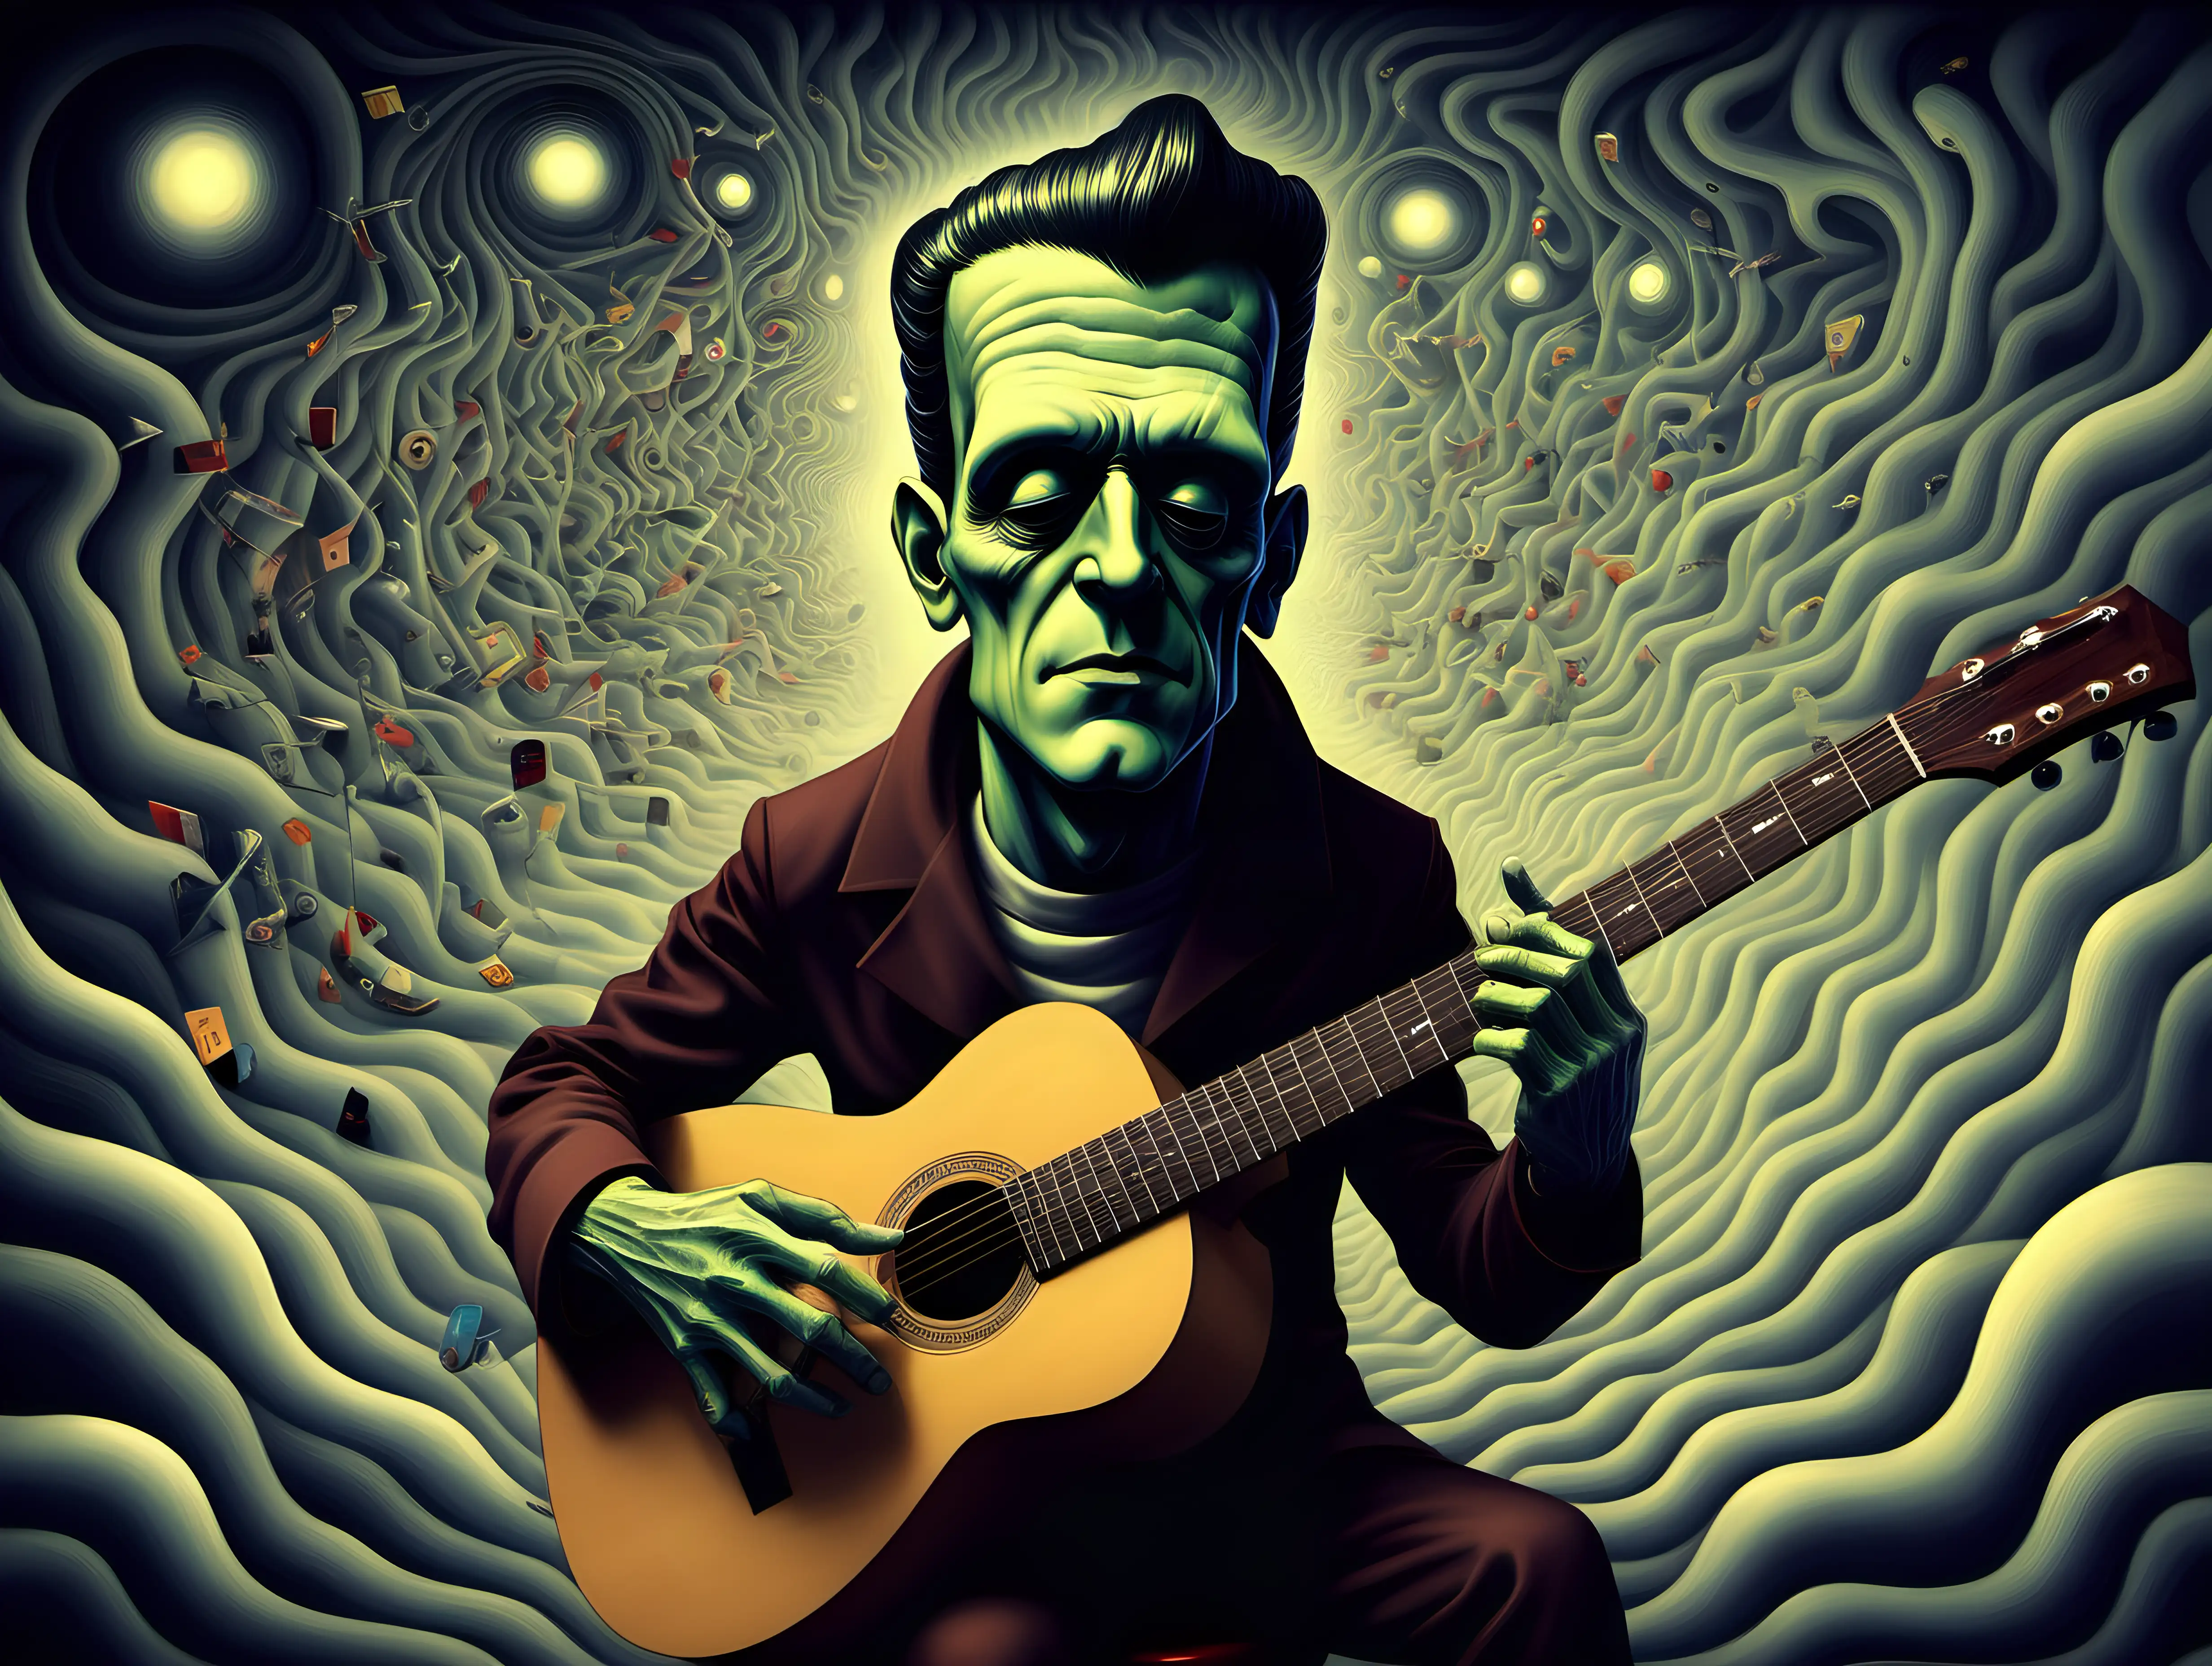 my mind on lsd while playingguitar in style of surrealism and abstract by Frankenstein